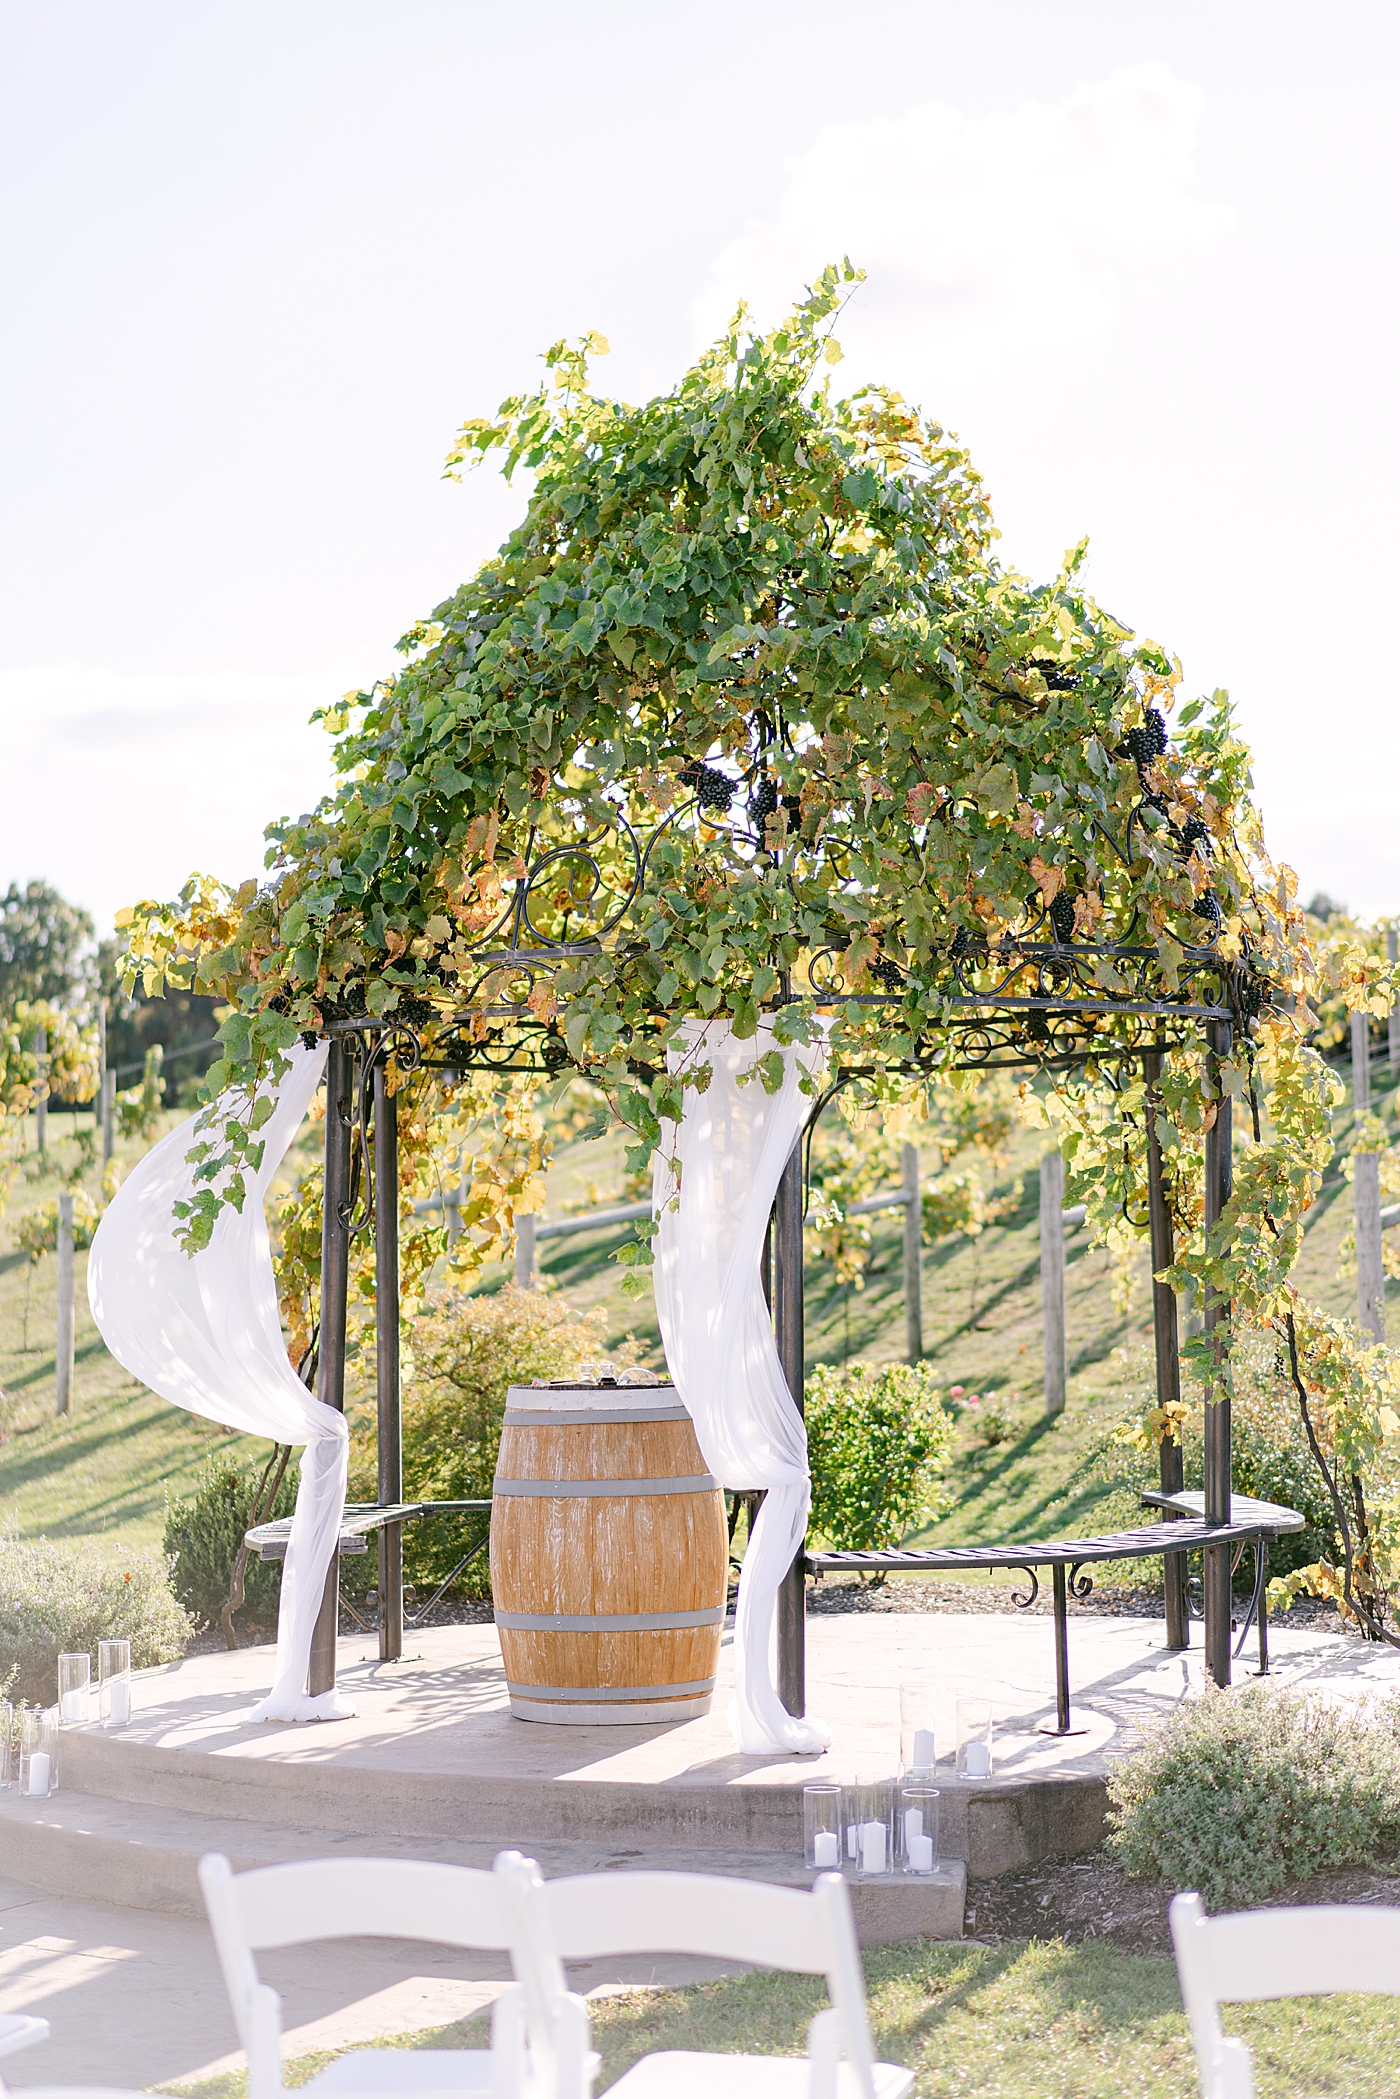 Wedding arbor covered in grape vines | Photo by Hope Helmuth Photography